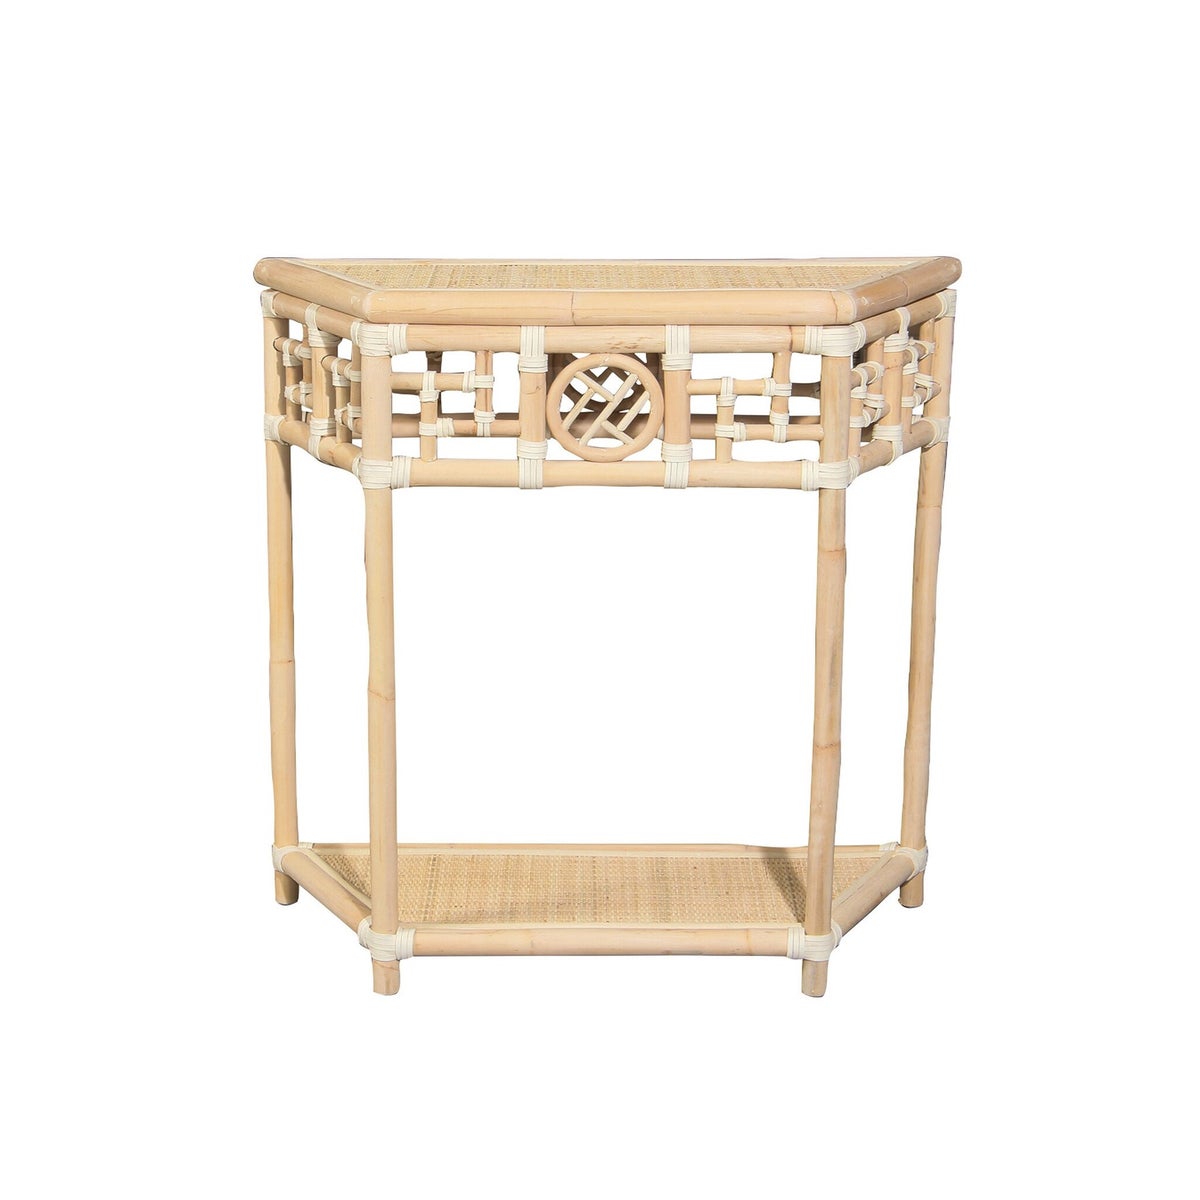 Demilune Table, Small Unpainted - "Select Your Color" Rattan Frame with Leather Wraps Woven Top